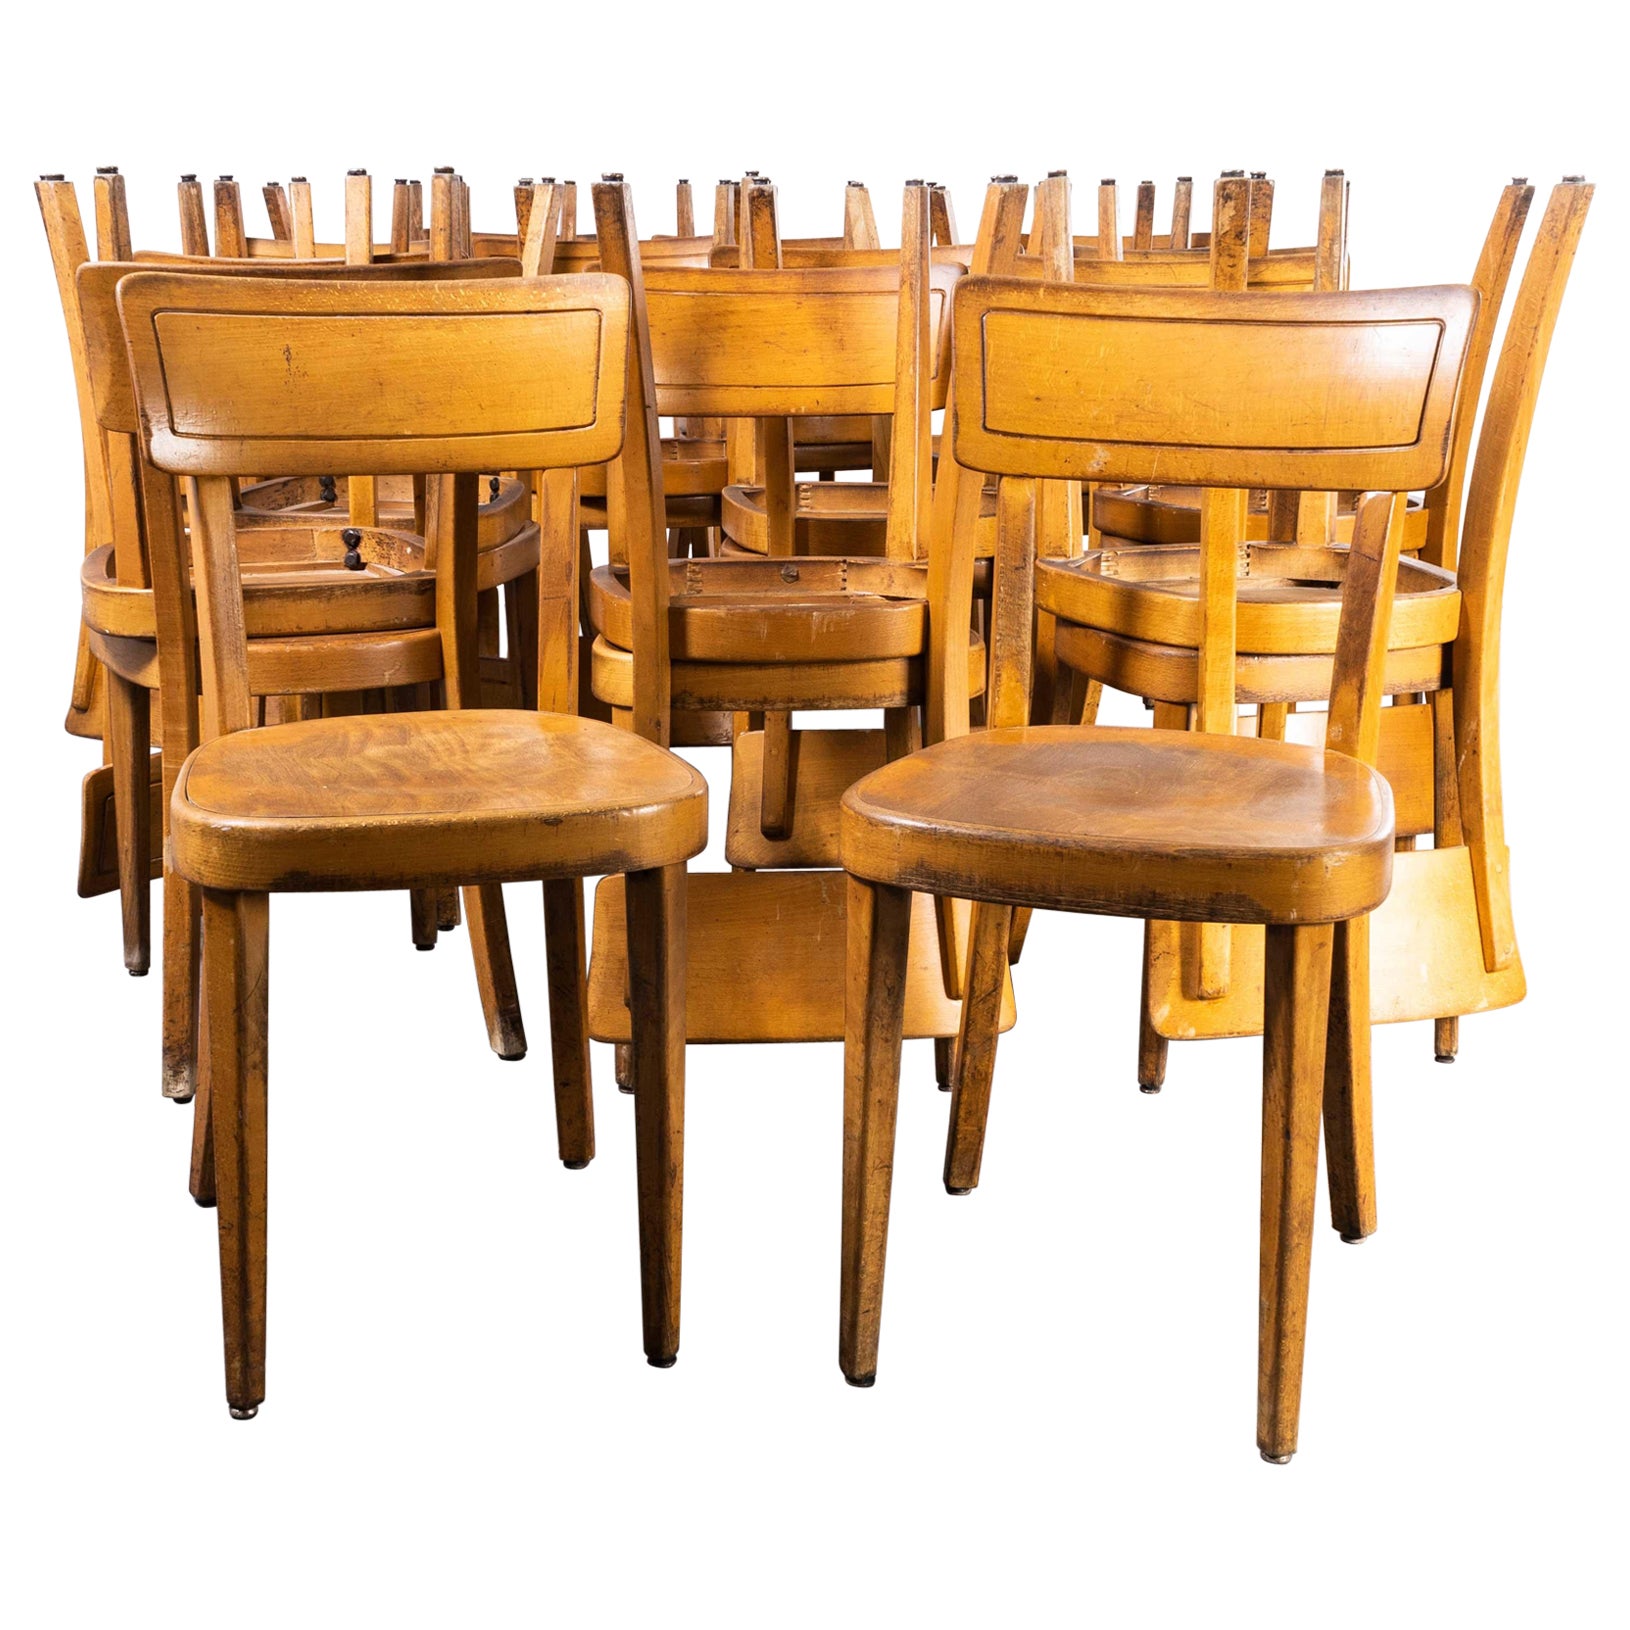 1960's Horgen Glarus Beech Saddle Back Dining Chairs, Various Quantities Availa